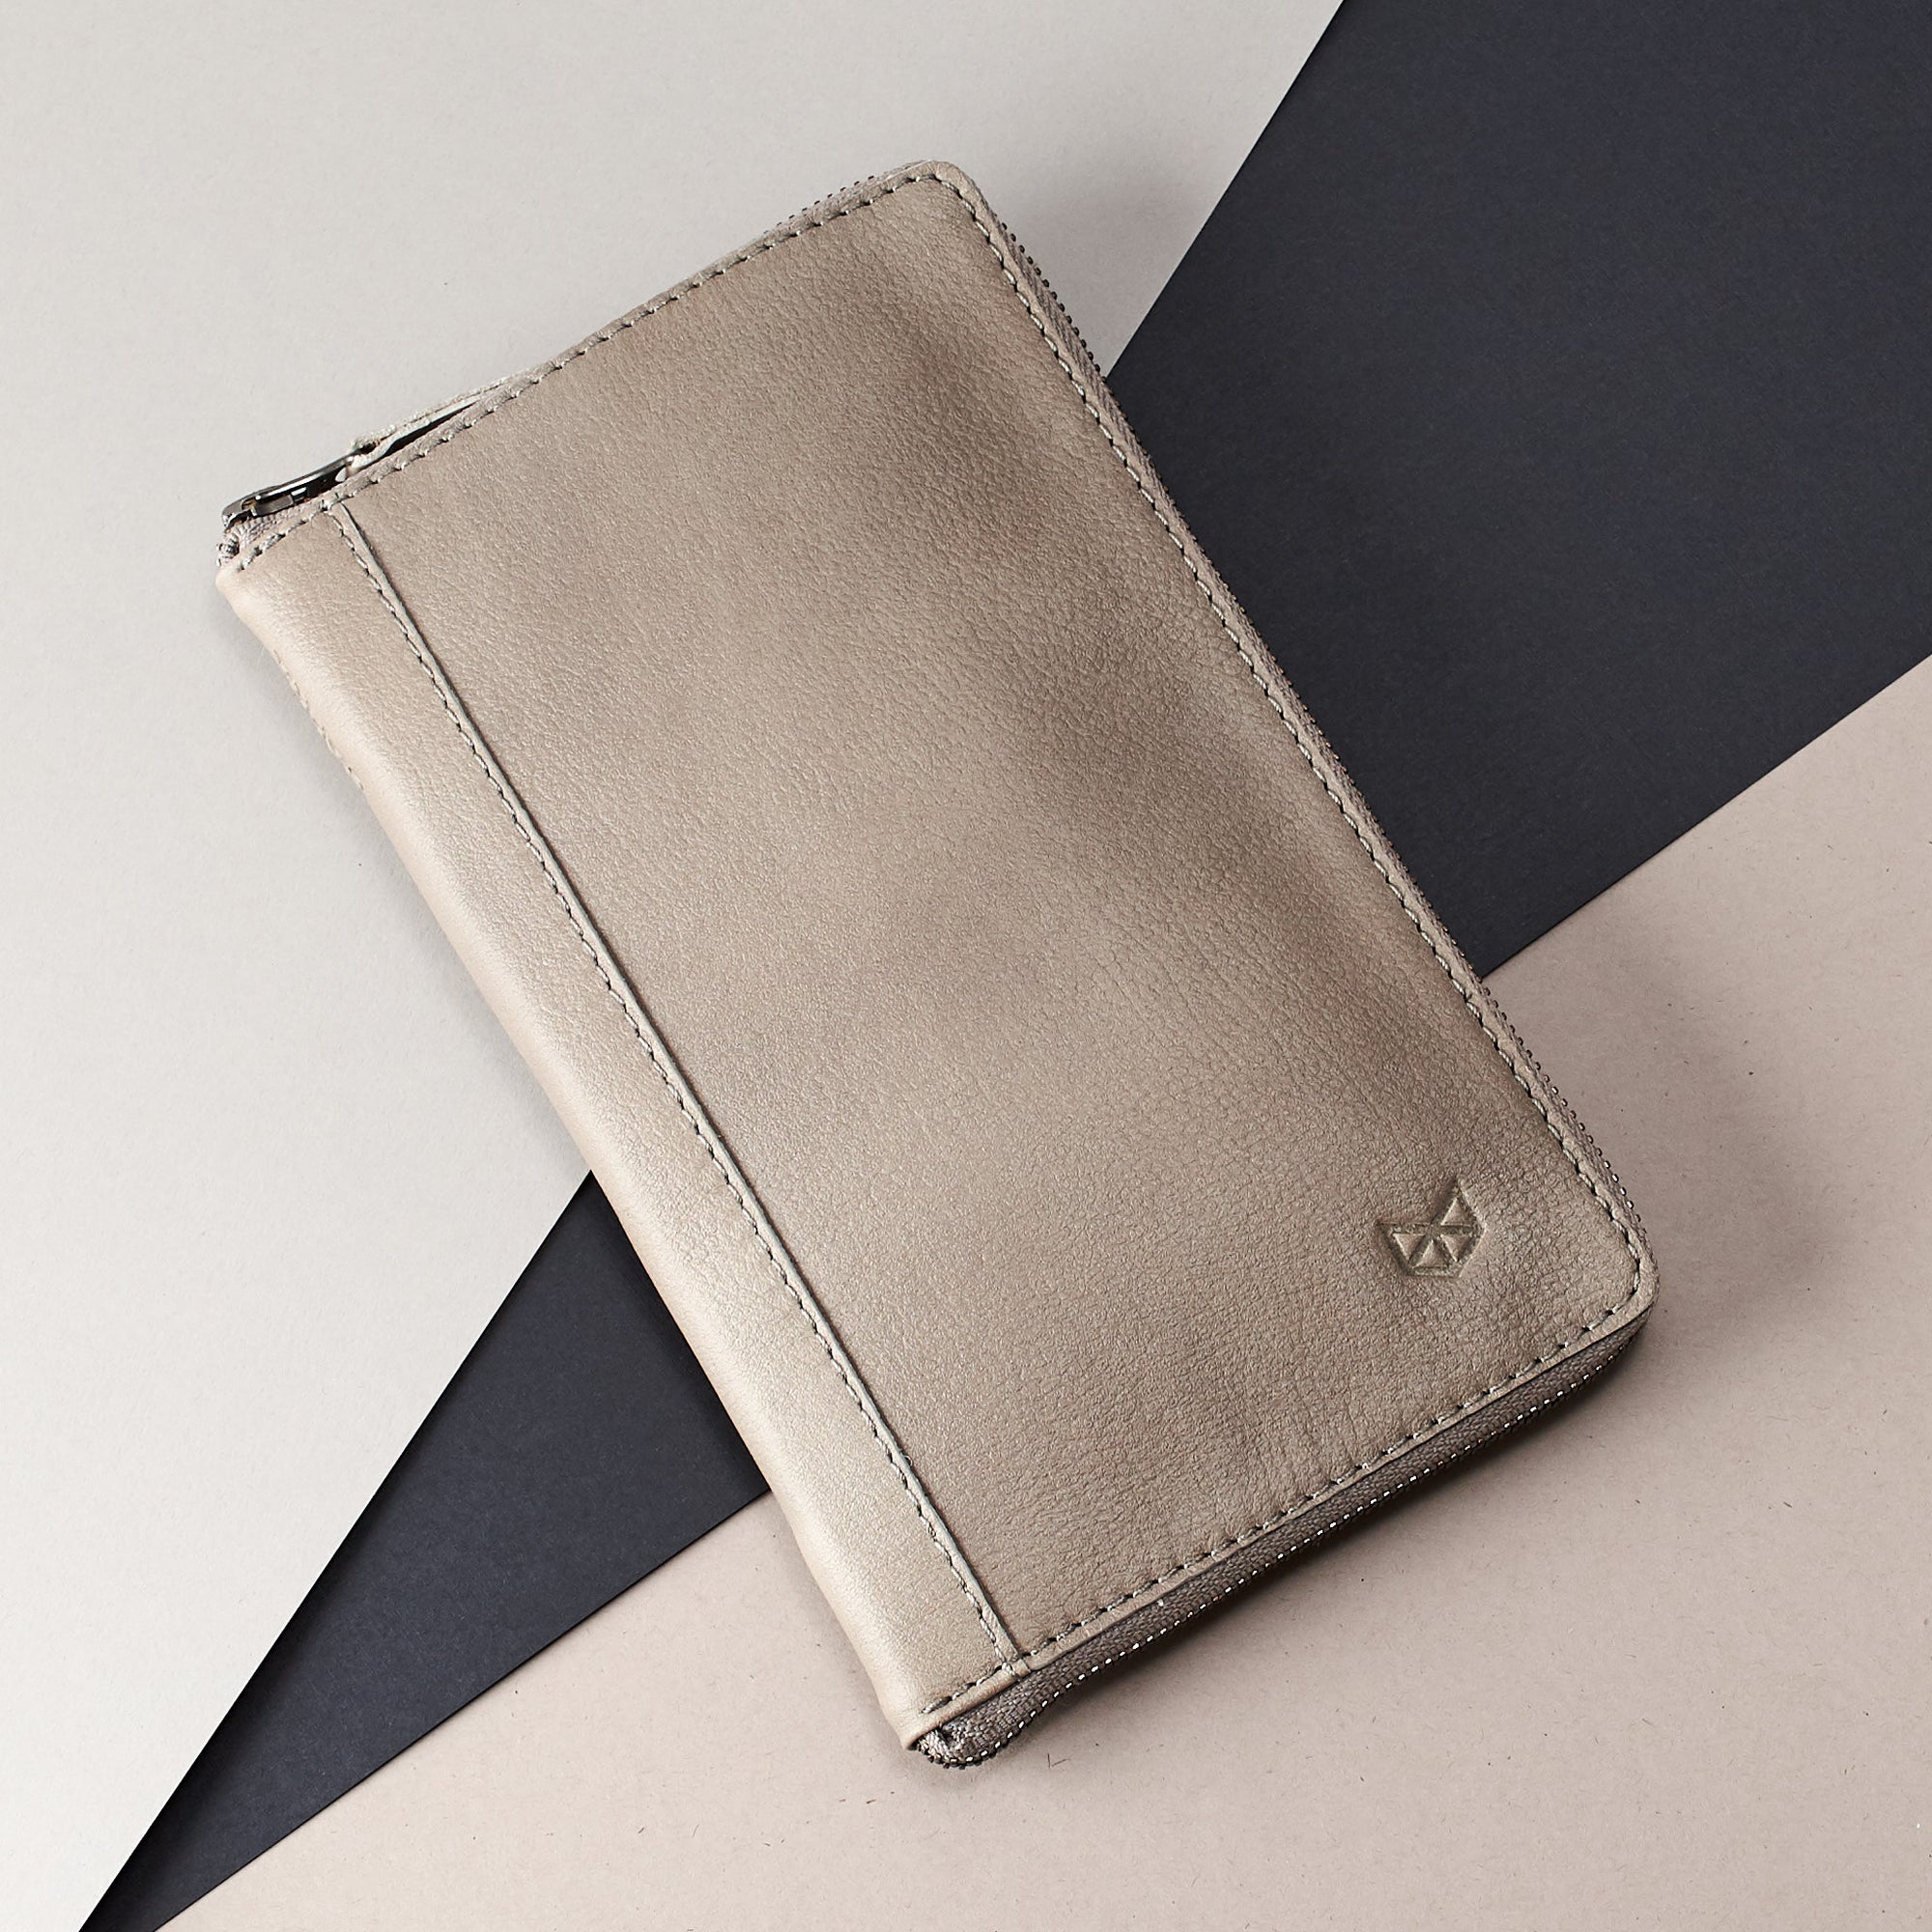 Style. Grey leather passport holder. Perfect for travelers. Gift for men. Personalized engraving. Handmade Leather wallet perfect money and card holder for trips